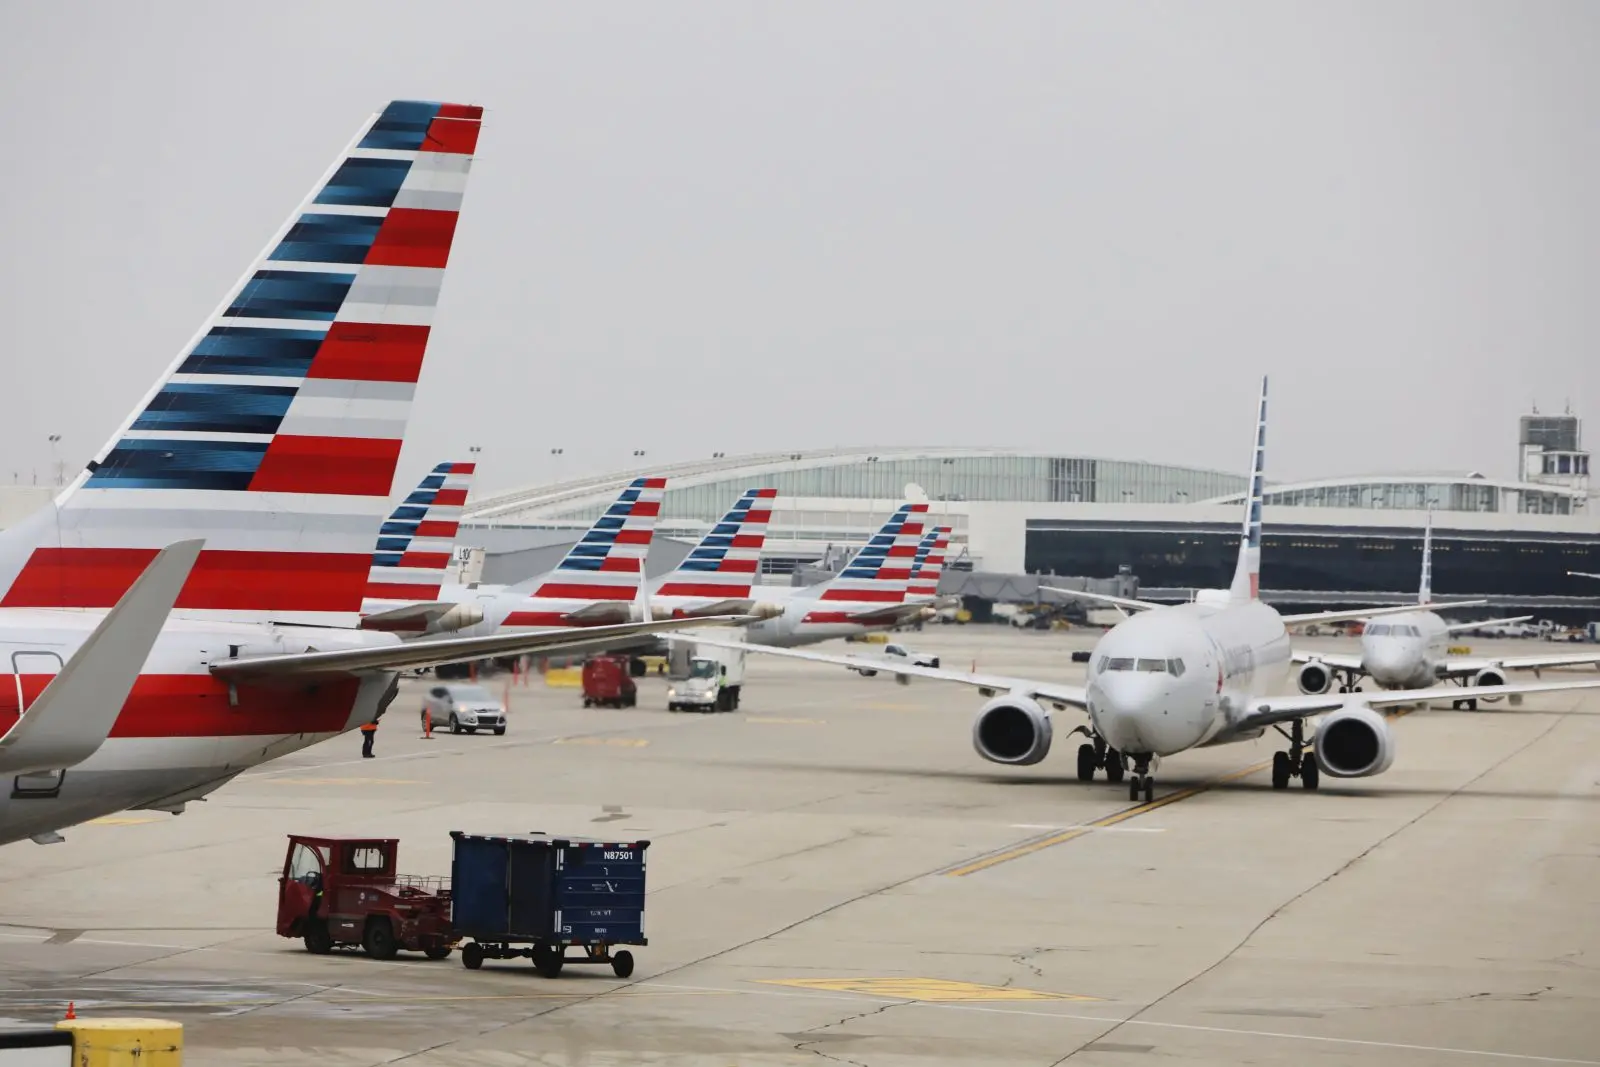 American Airlines aircraft tails and plane taxing